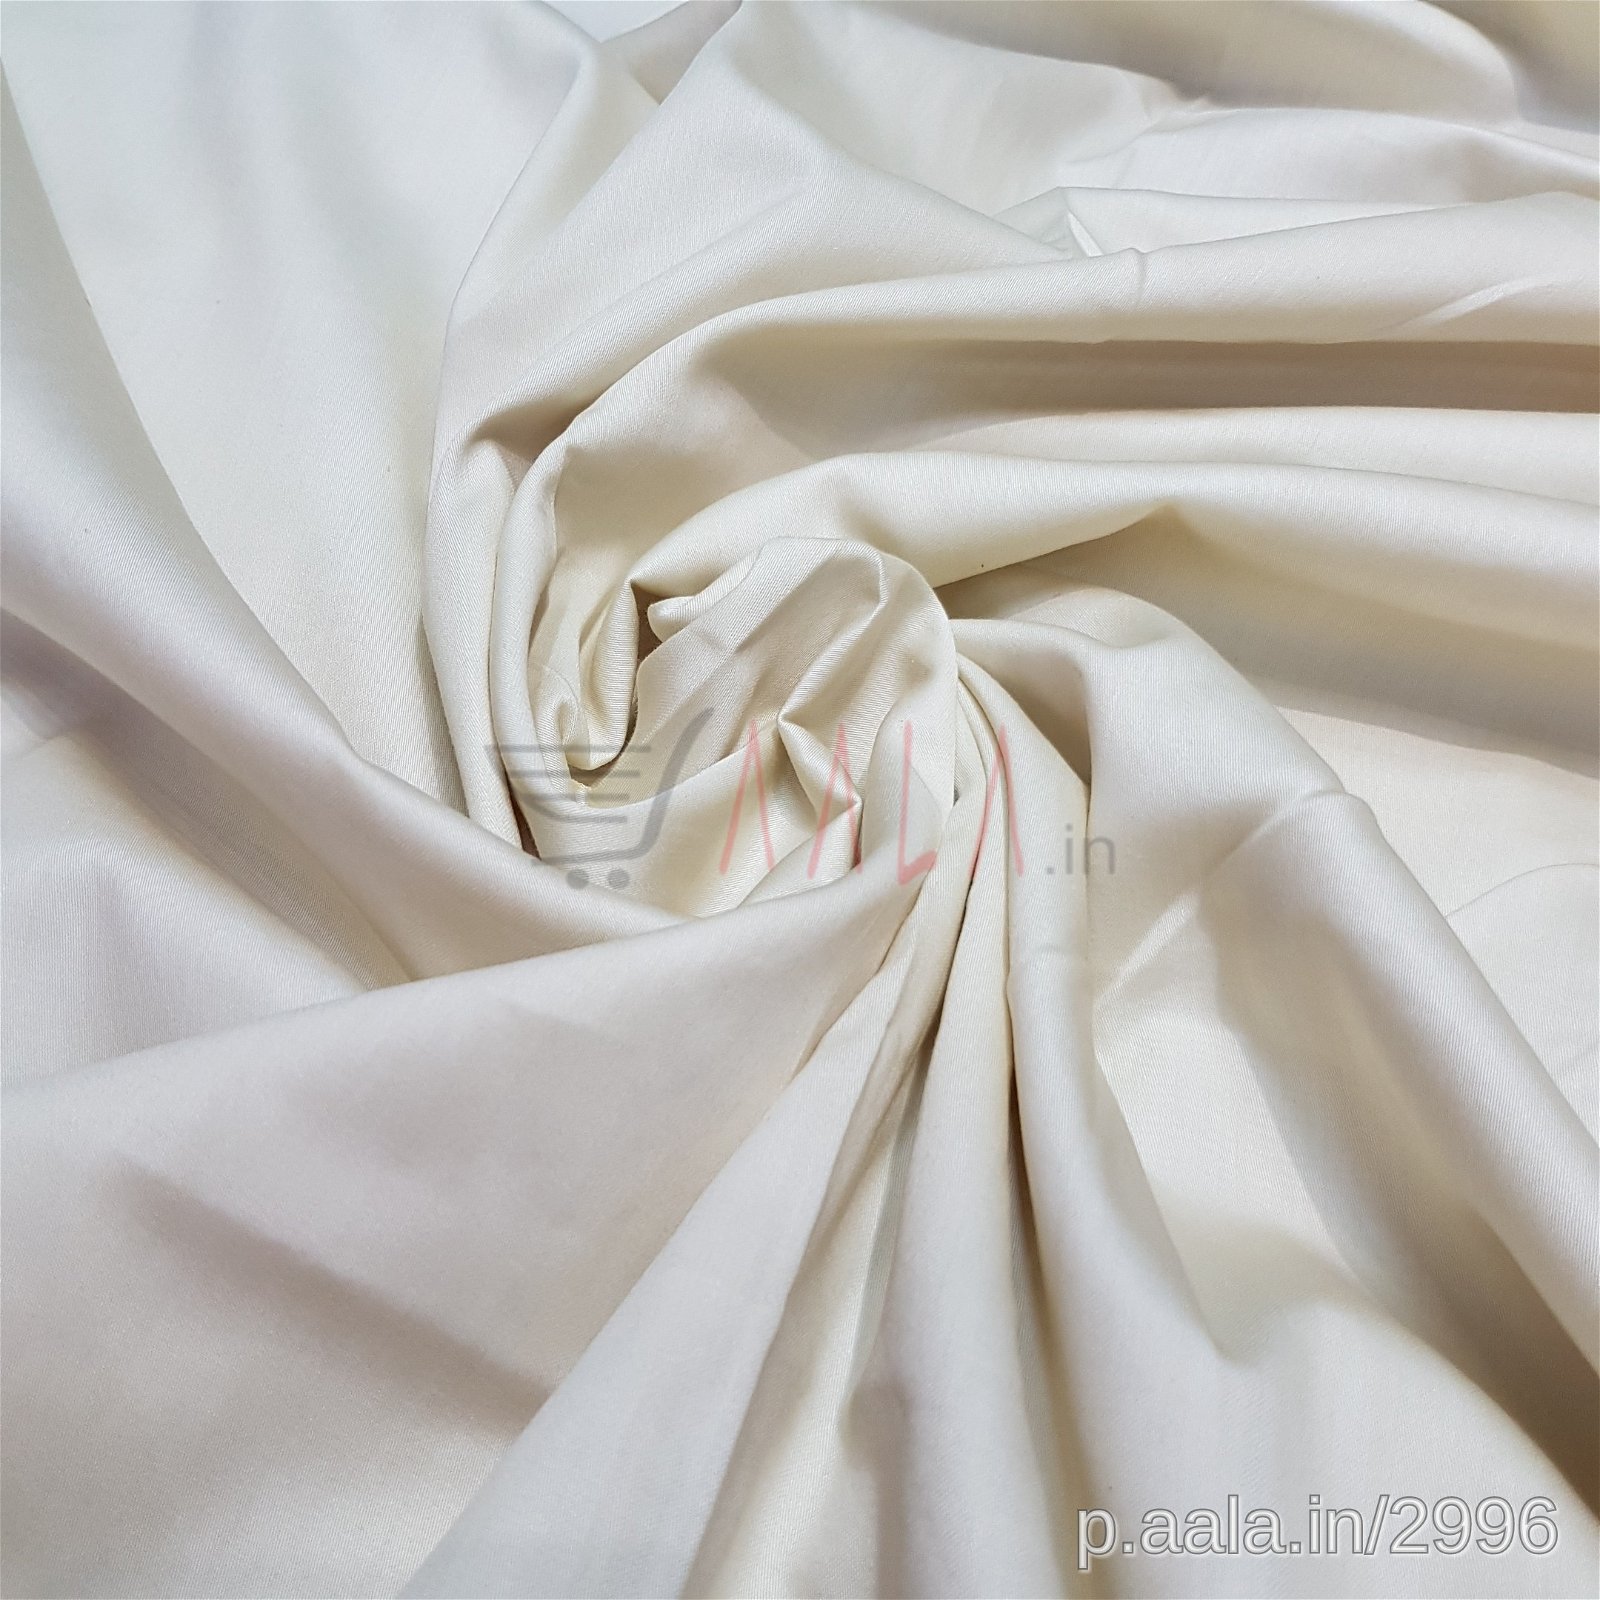 Satin Cotton 44 Inches Dyed Per Metre #2996